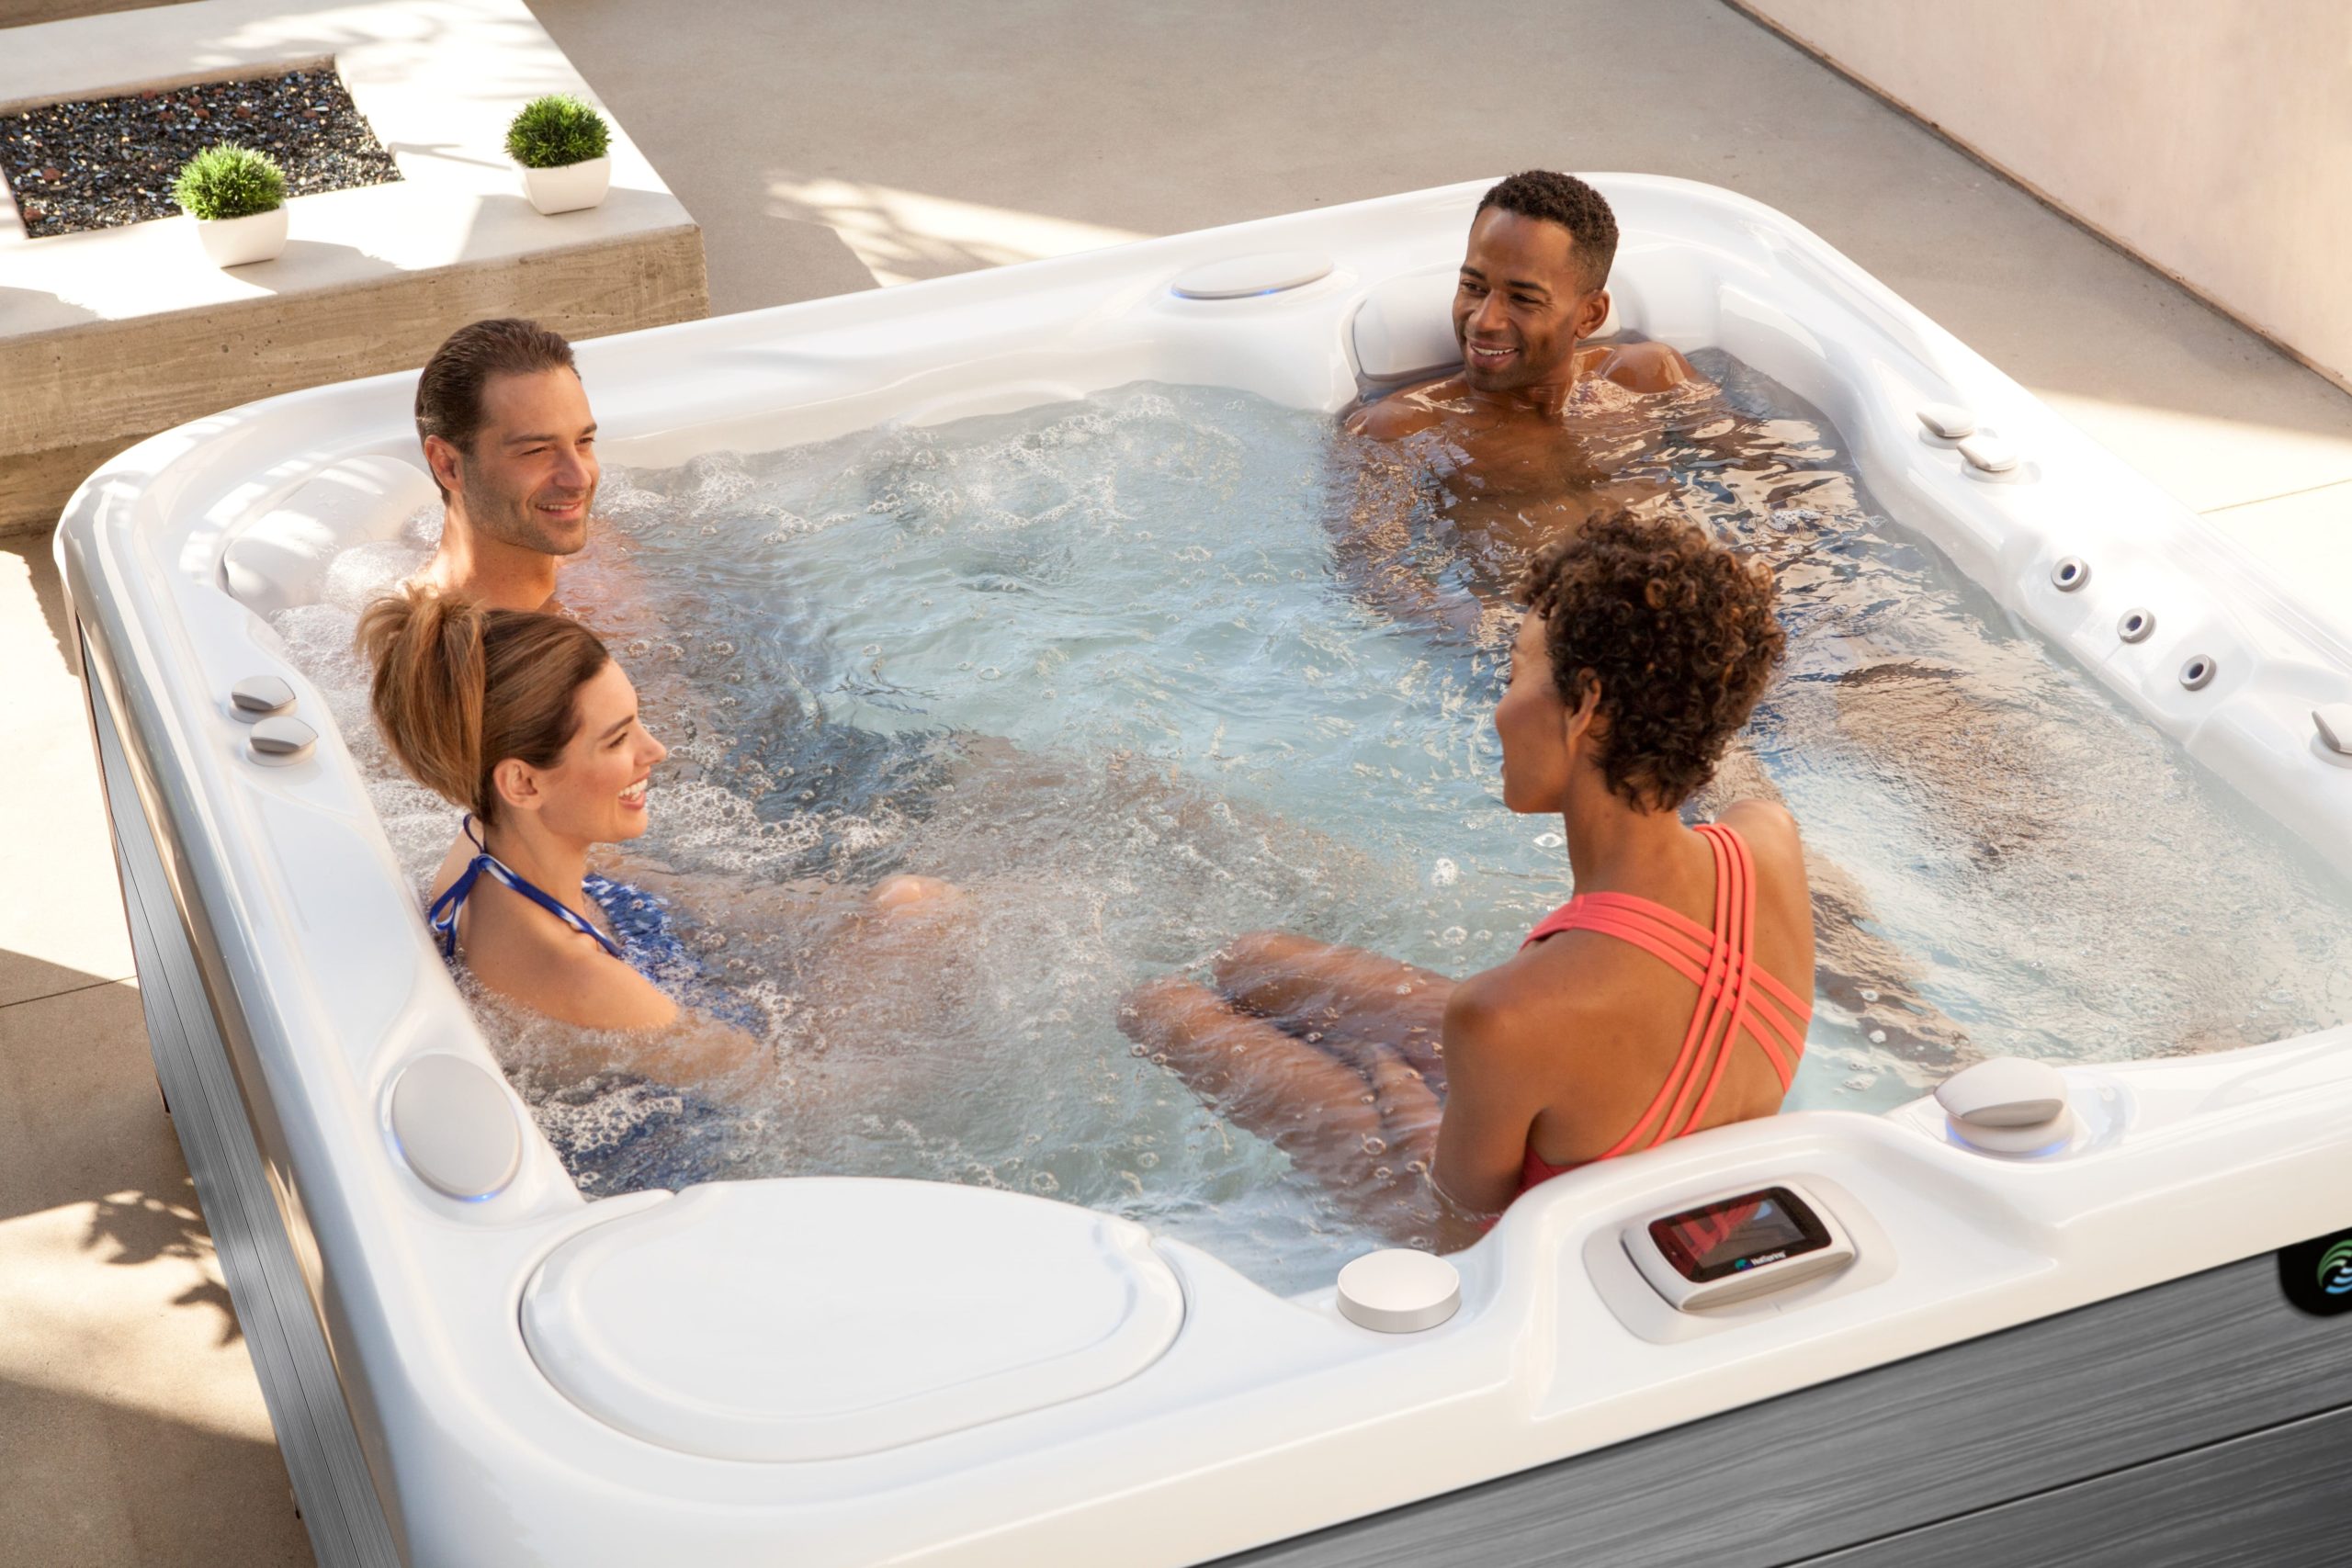 With a little care, the right purification system, and these water conservation tips, hot tub water can last for over a year.